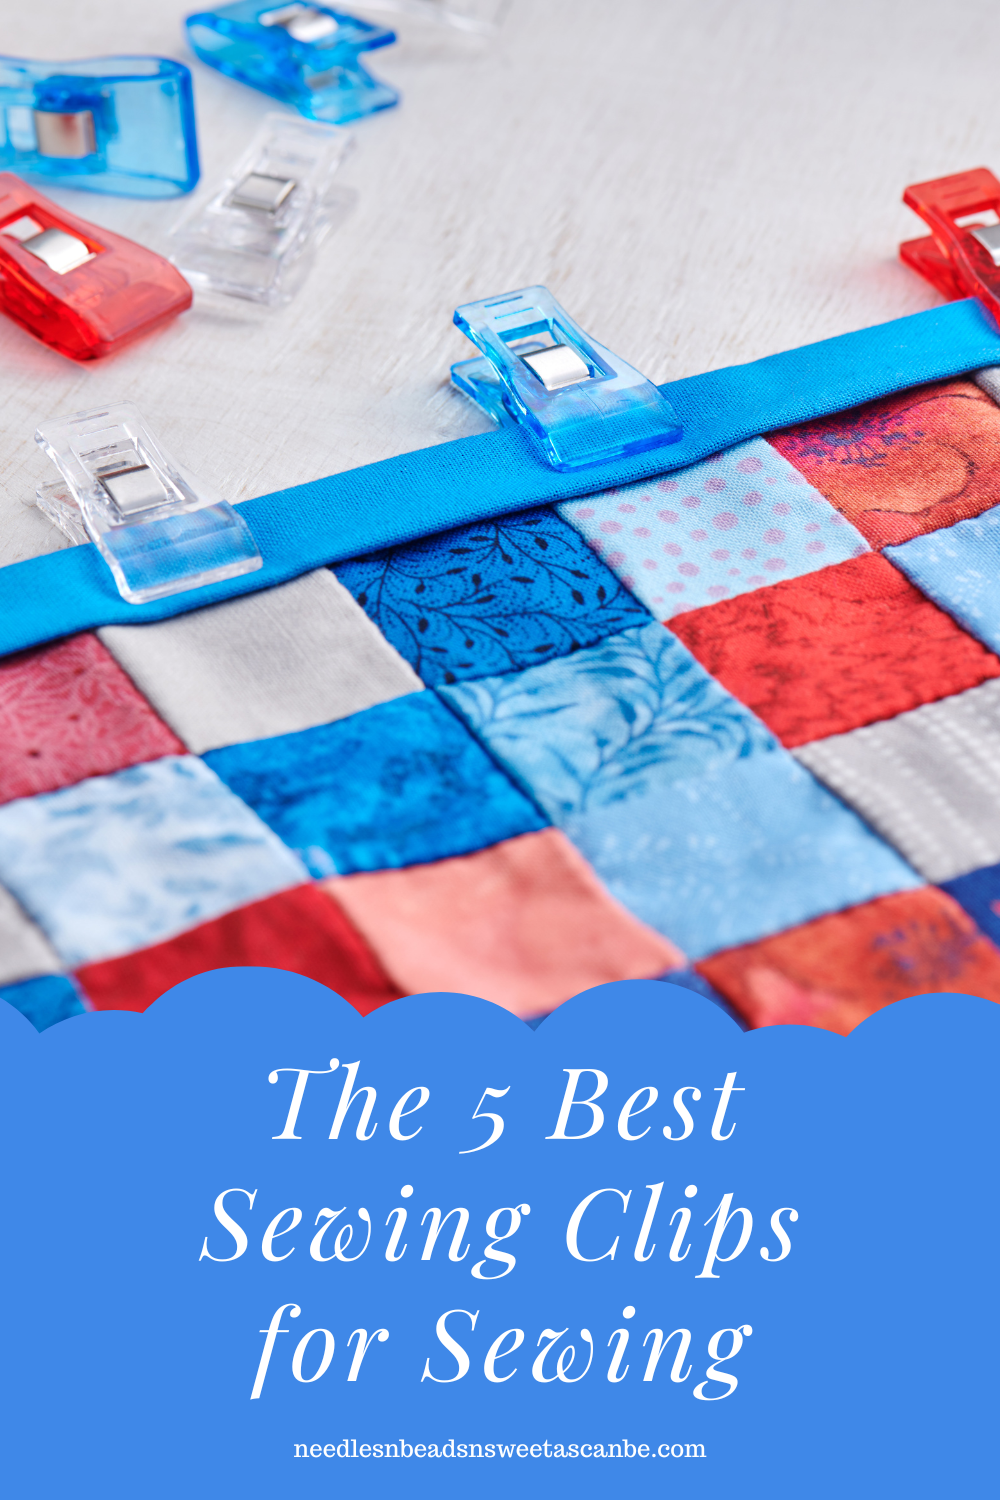 What are The 5 Best Sewing Clips to Use for Sewing